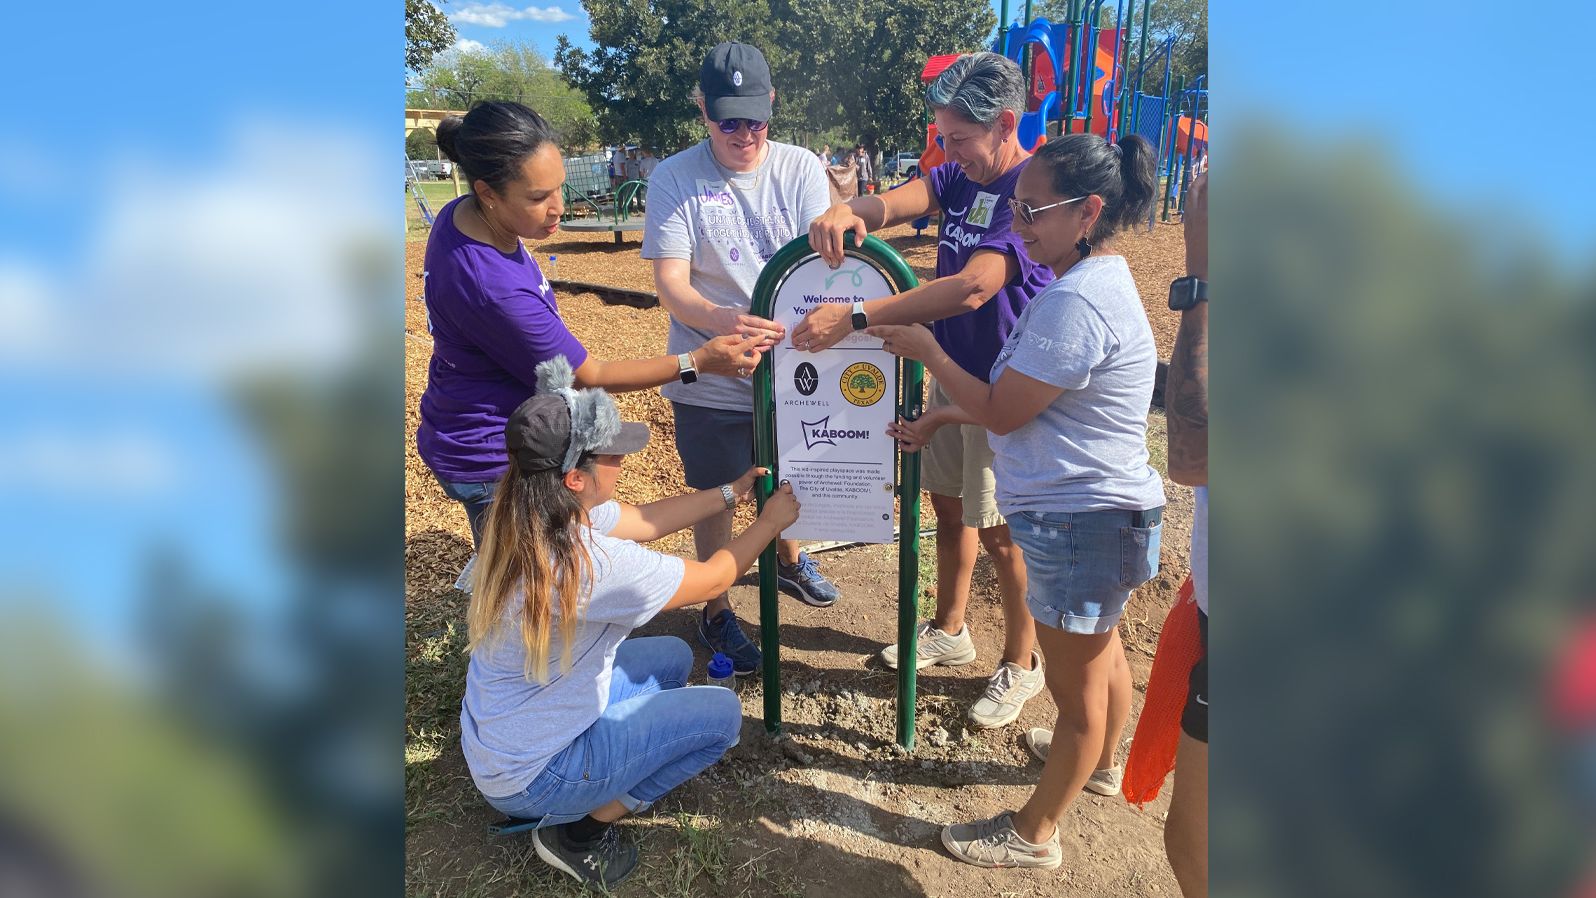 The city of Uvalde, Archewell Foundation and KABOOM! unveiled a new playground designed to help the community recover after the tragedy in May. 